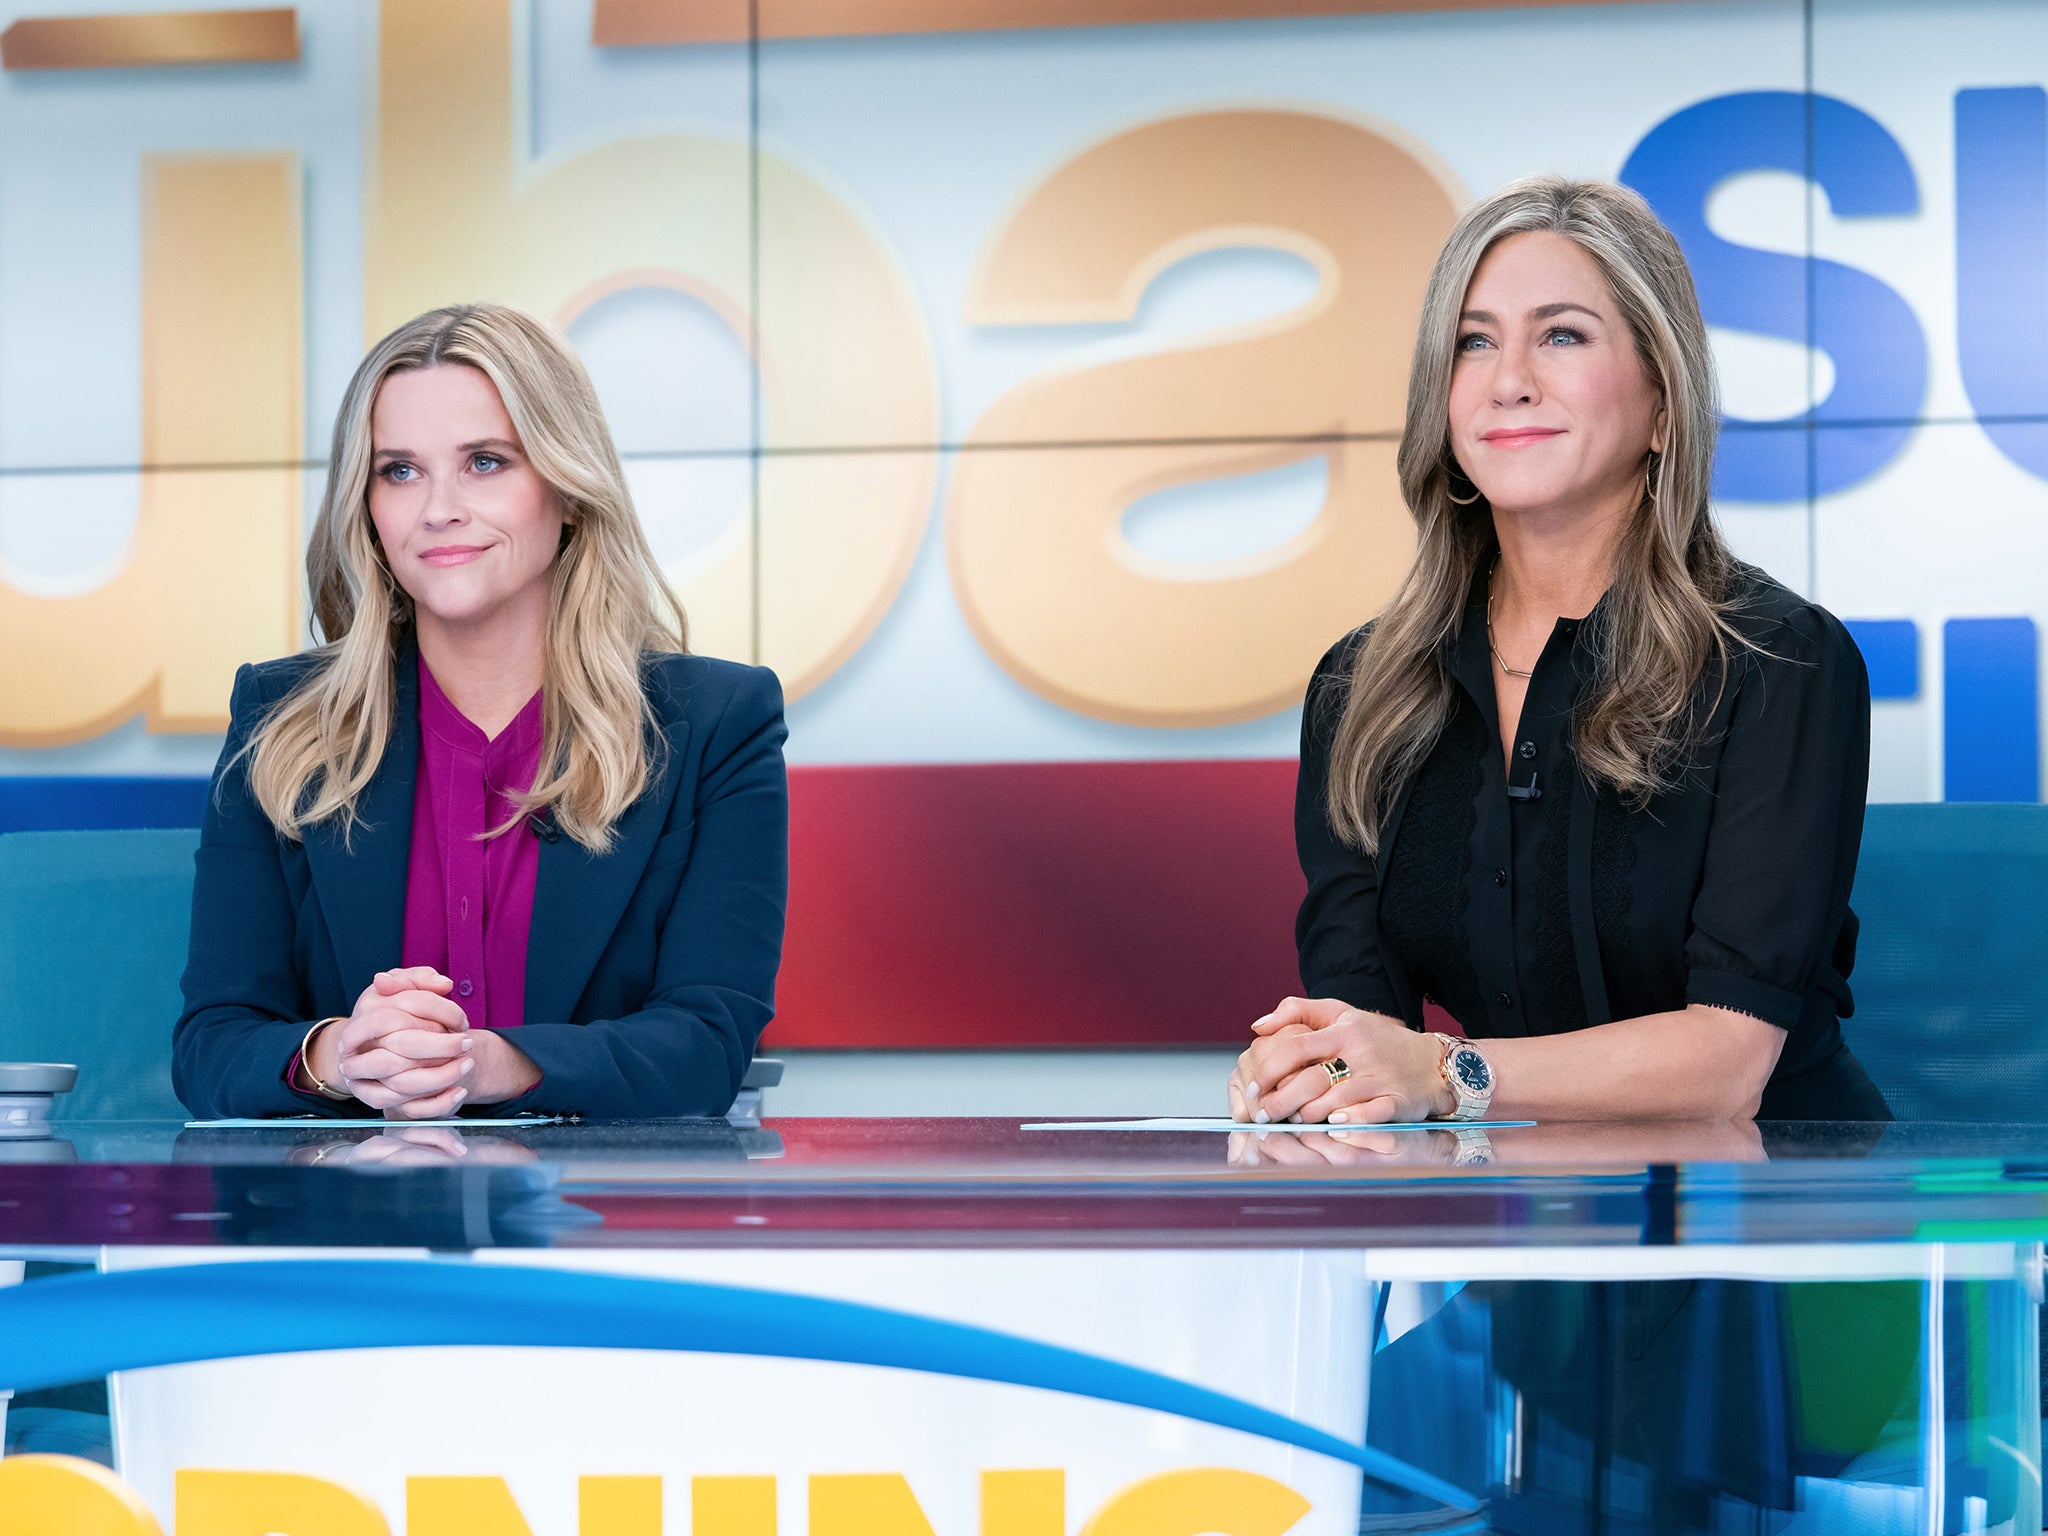 Reese Witherspoon and Jennifer Aniston in ‘The Morning Show'